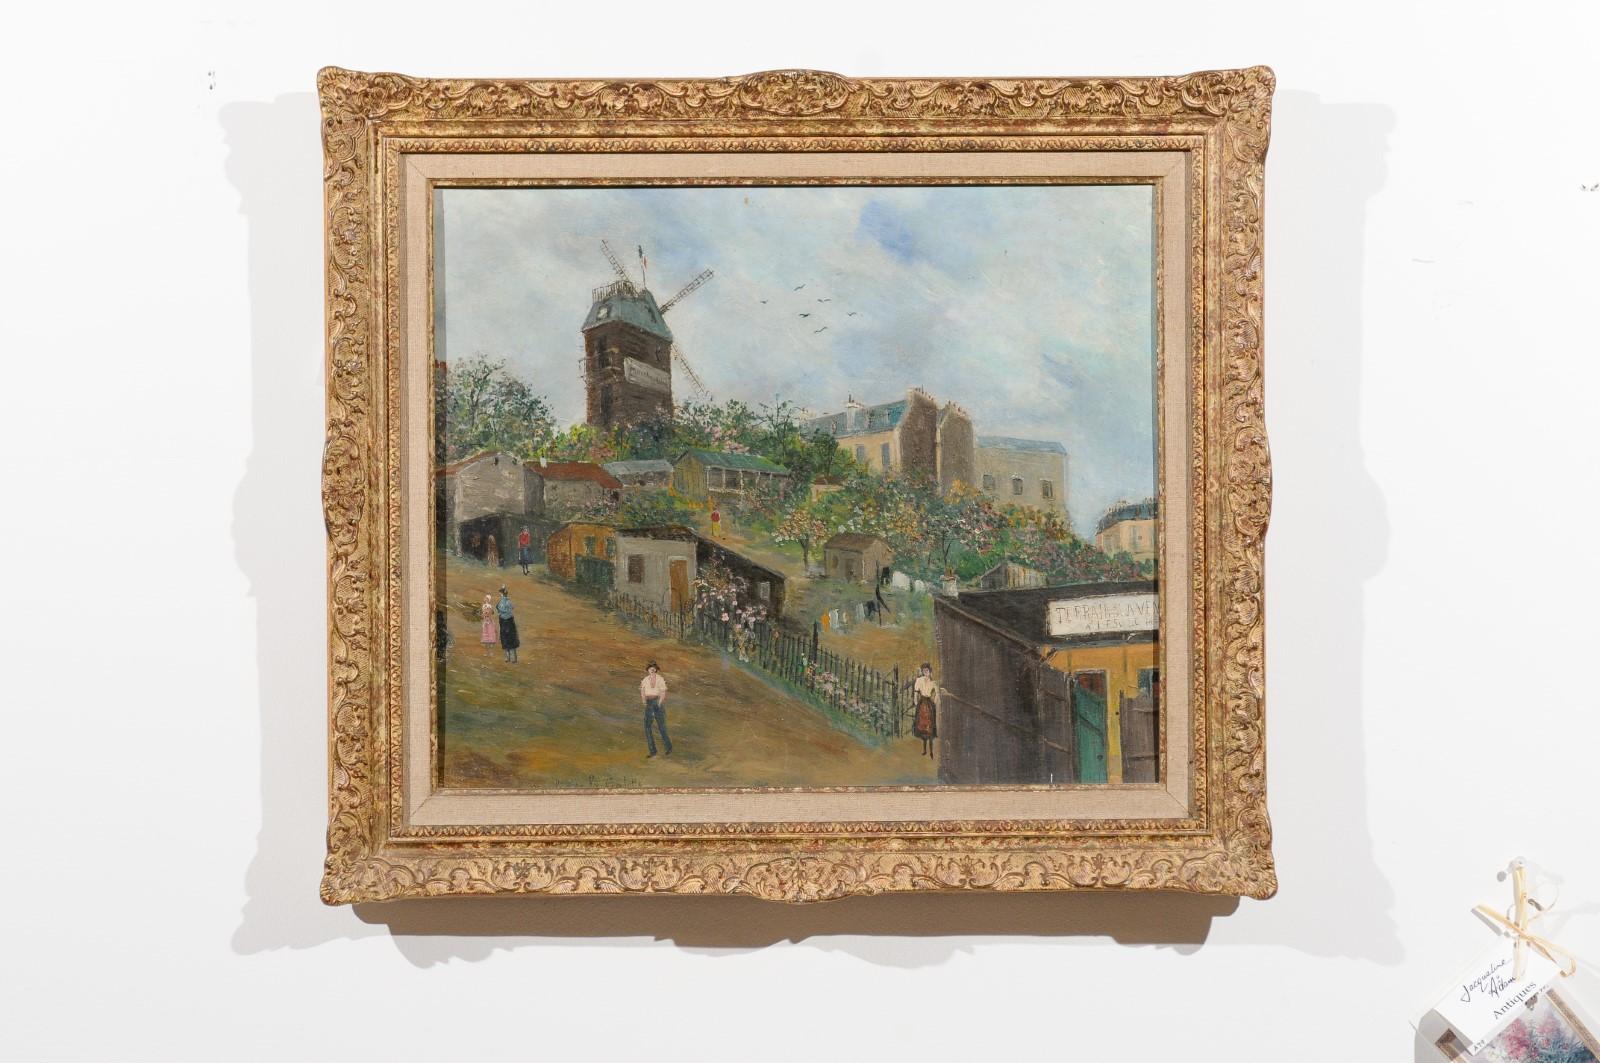 A French oil on board painting from the 20th century, depicting the Moulin de la Galette. Created in France during the 20th century, this oil on board painting captures our attention with its depiction of the famous Moulin de la Galette, the